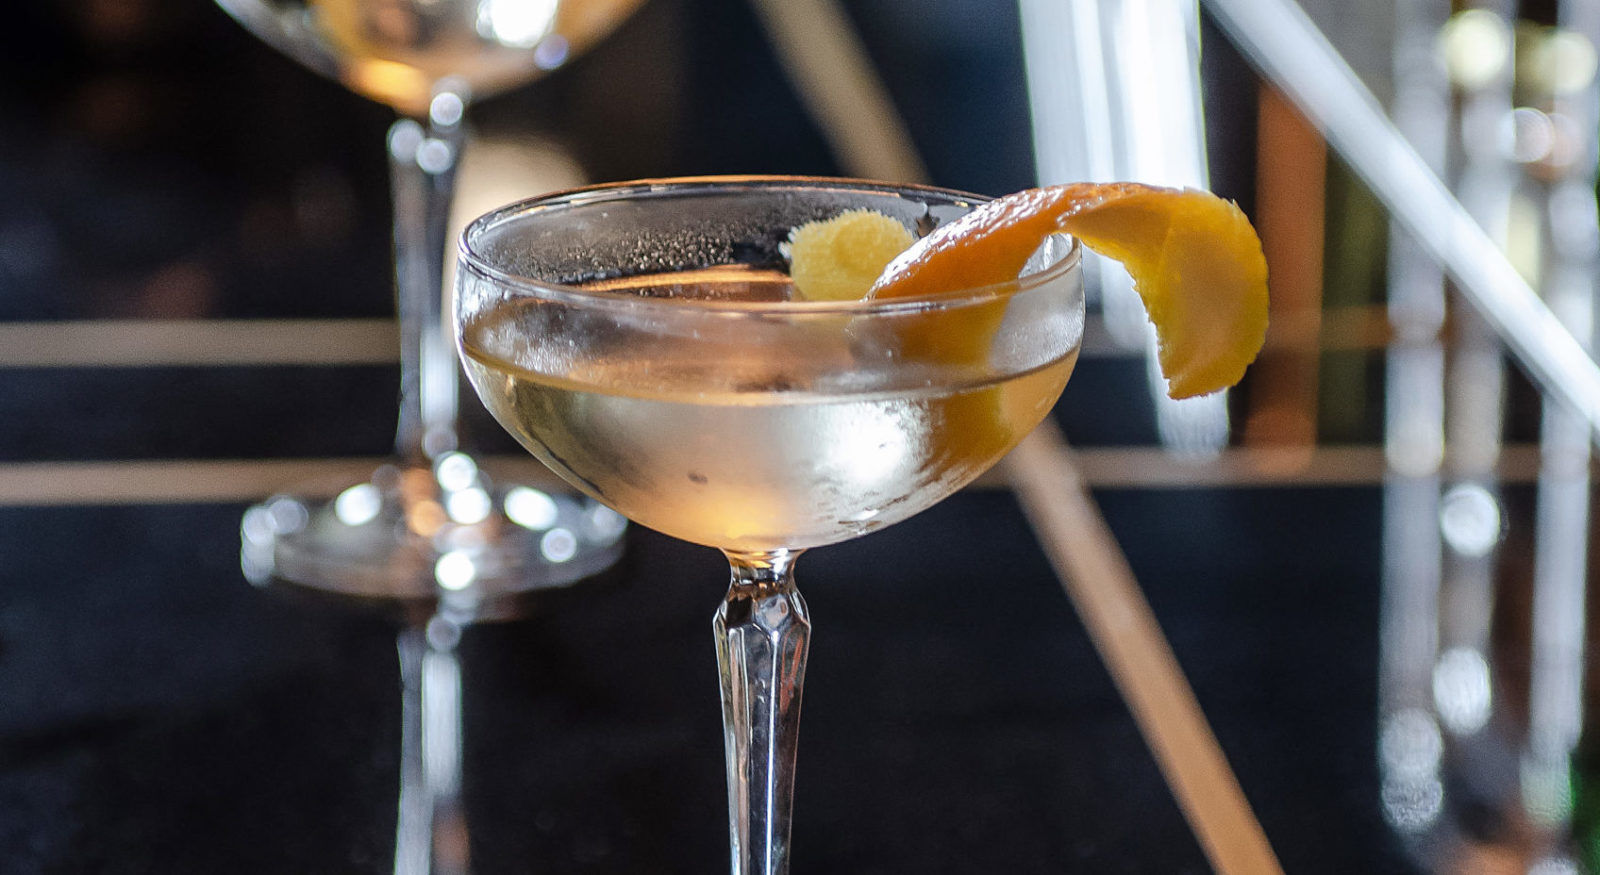 This recipe for James Bond’s famous Vesper Martini will impress any guest